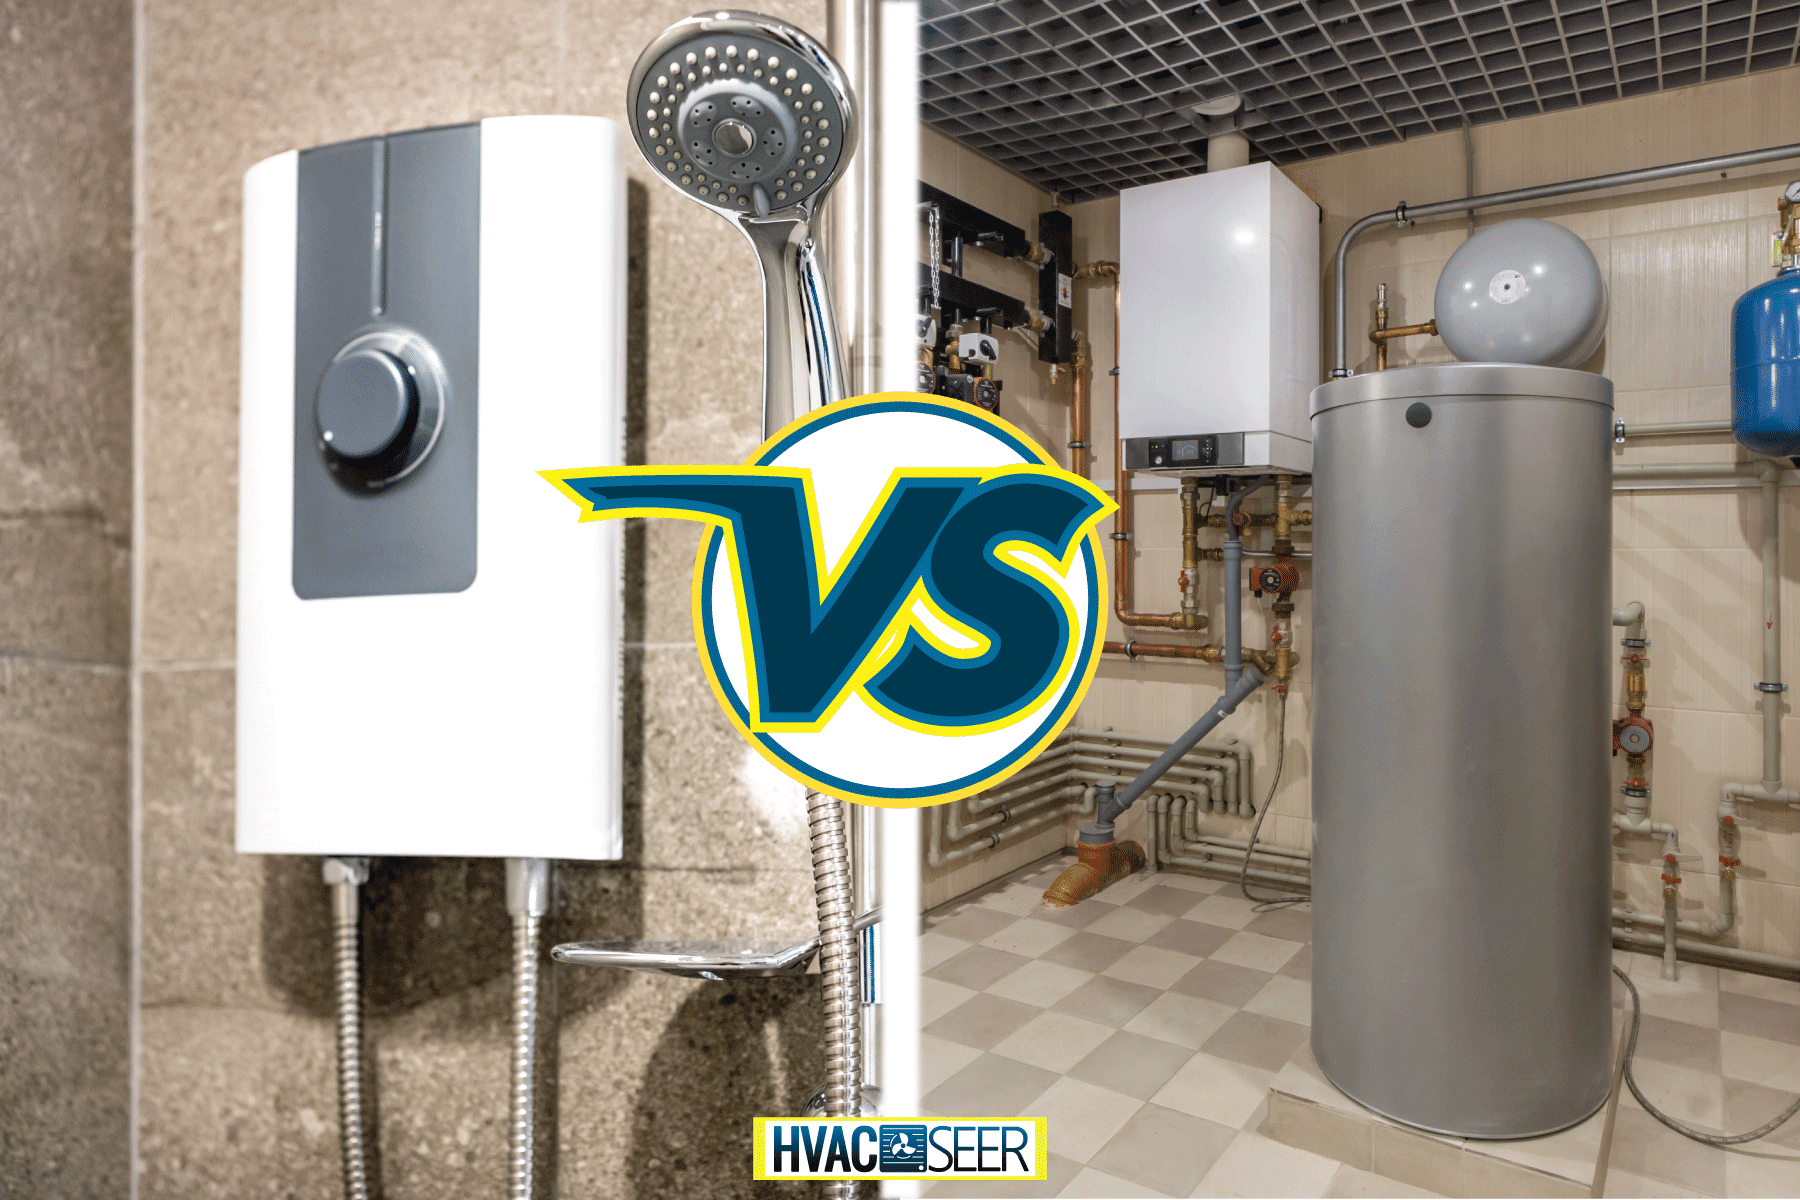 Boiler and water heater collage photo, Boiler Vs Water Heater - What's The Difference?